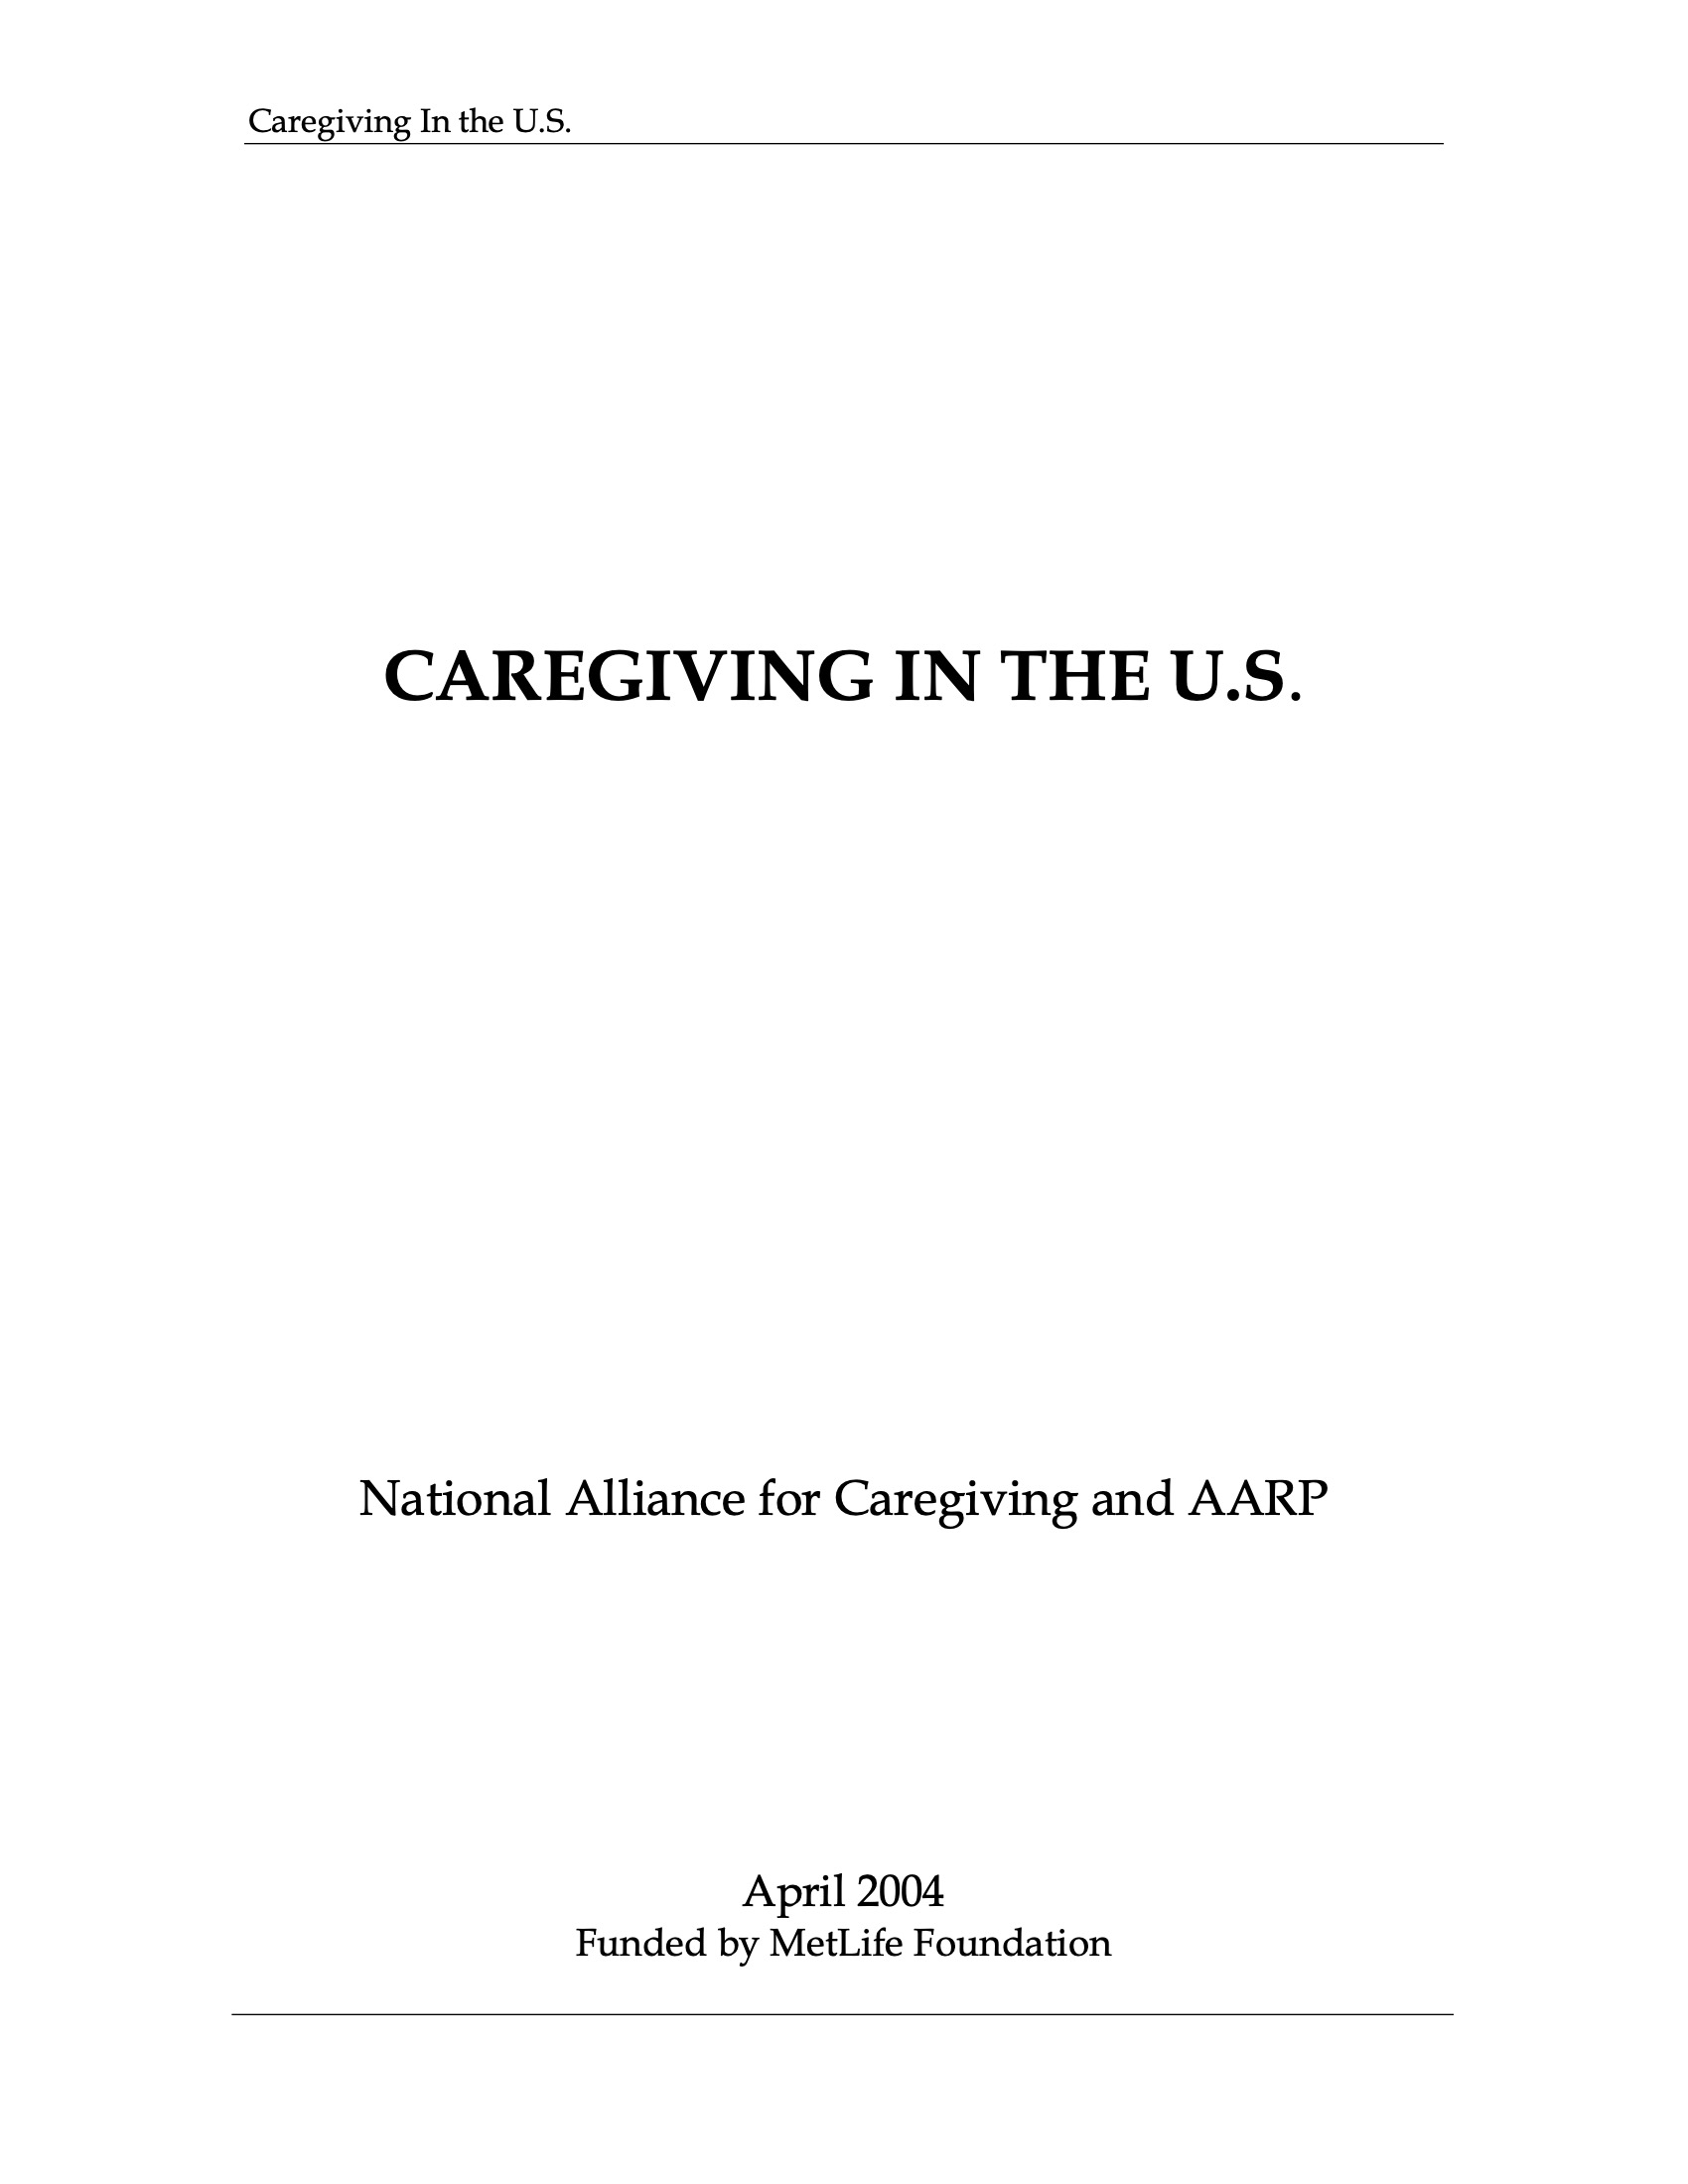 Caregiving in the US 2004 Cover Image